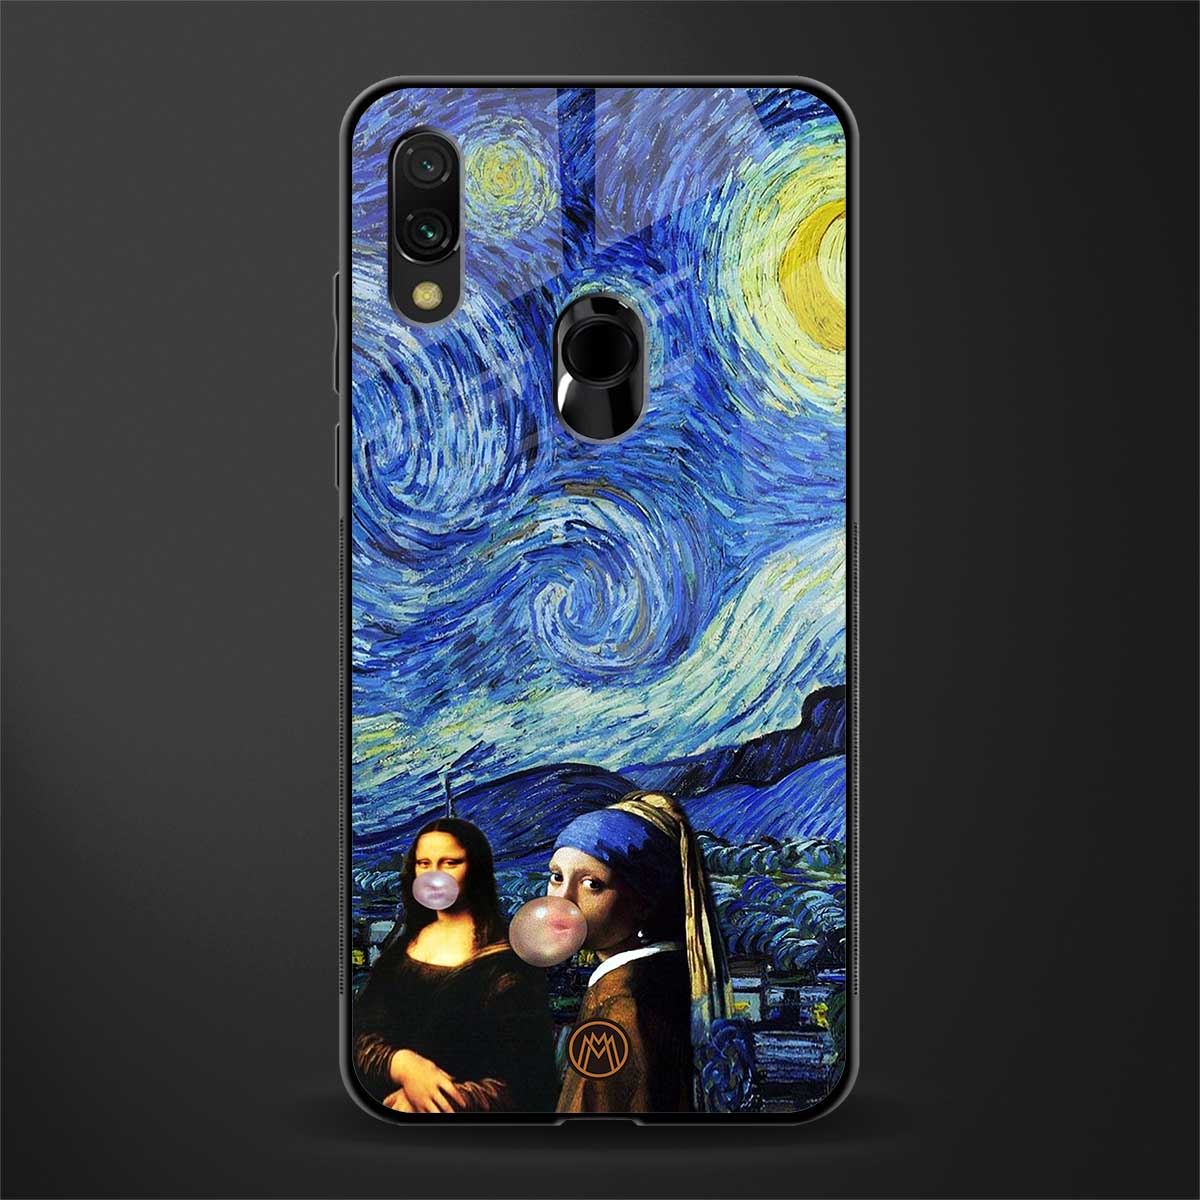 mona lisa starry night glass case for redmi note 7 pro image